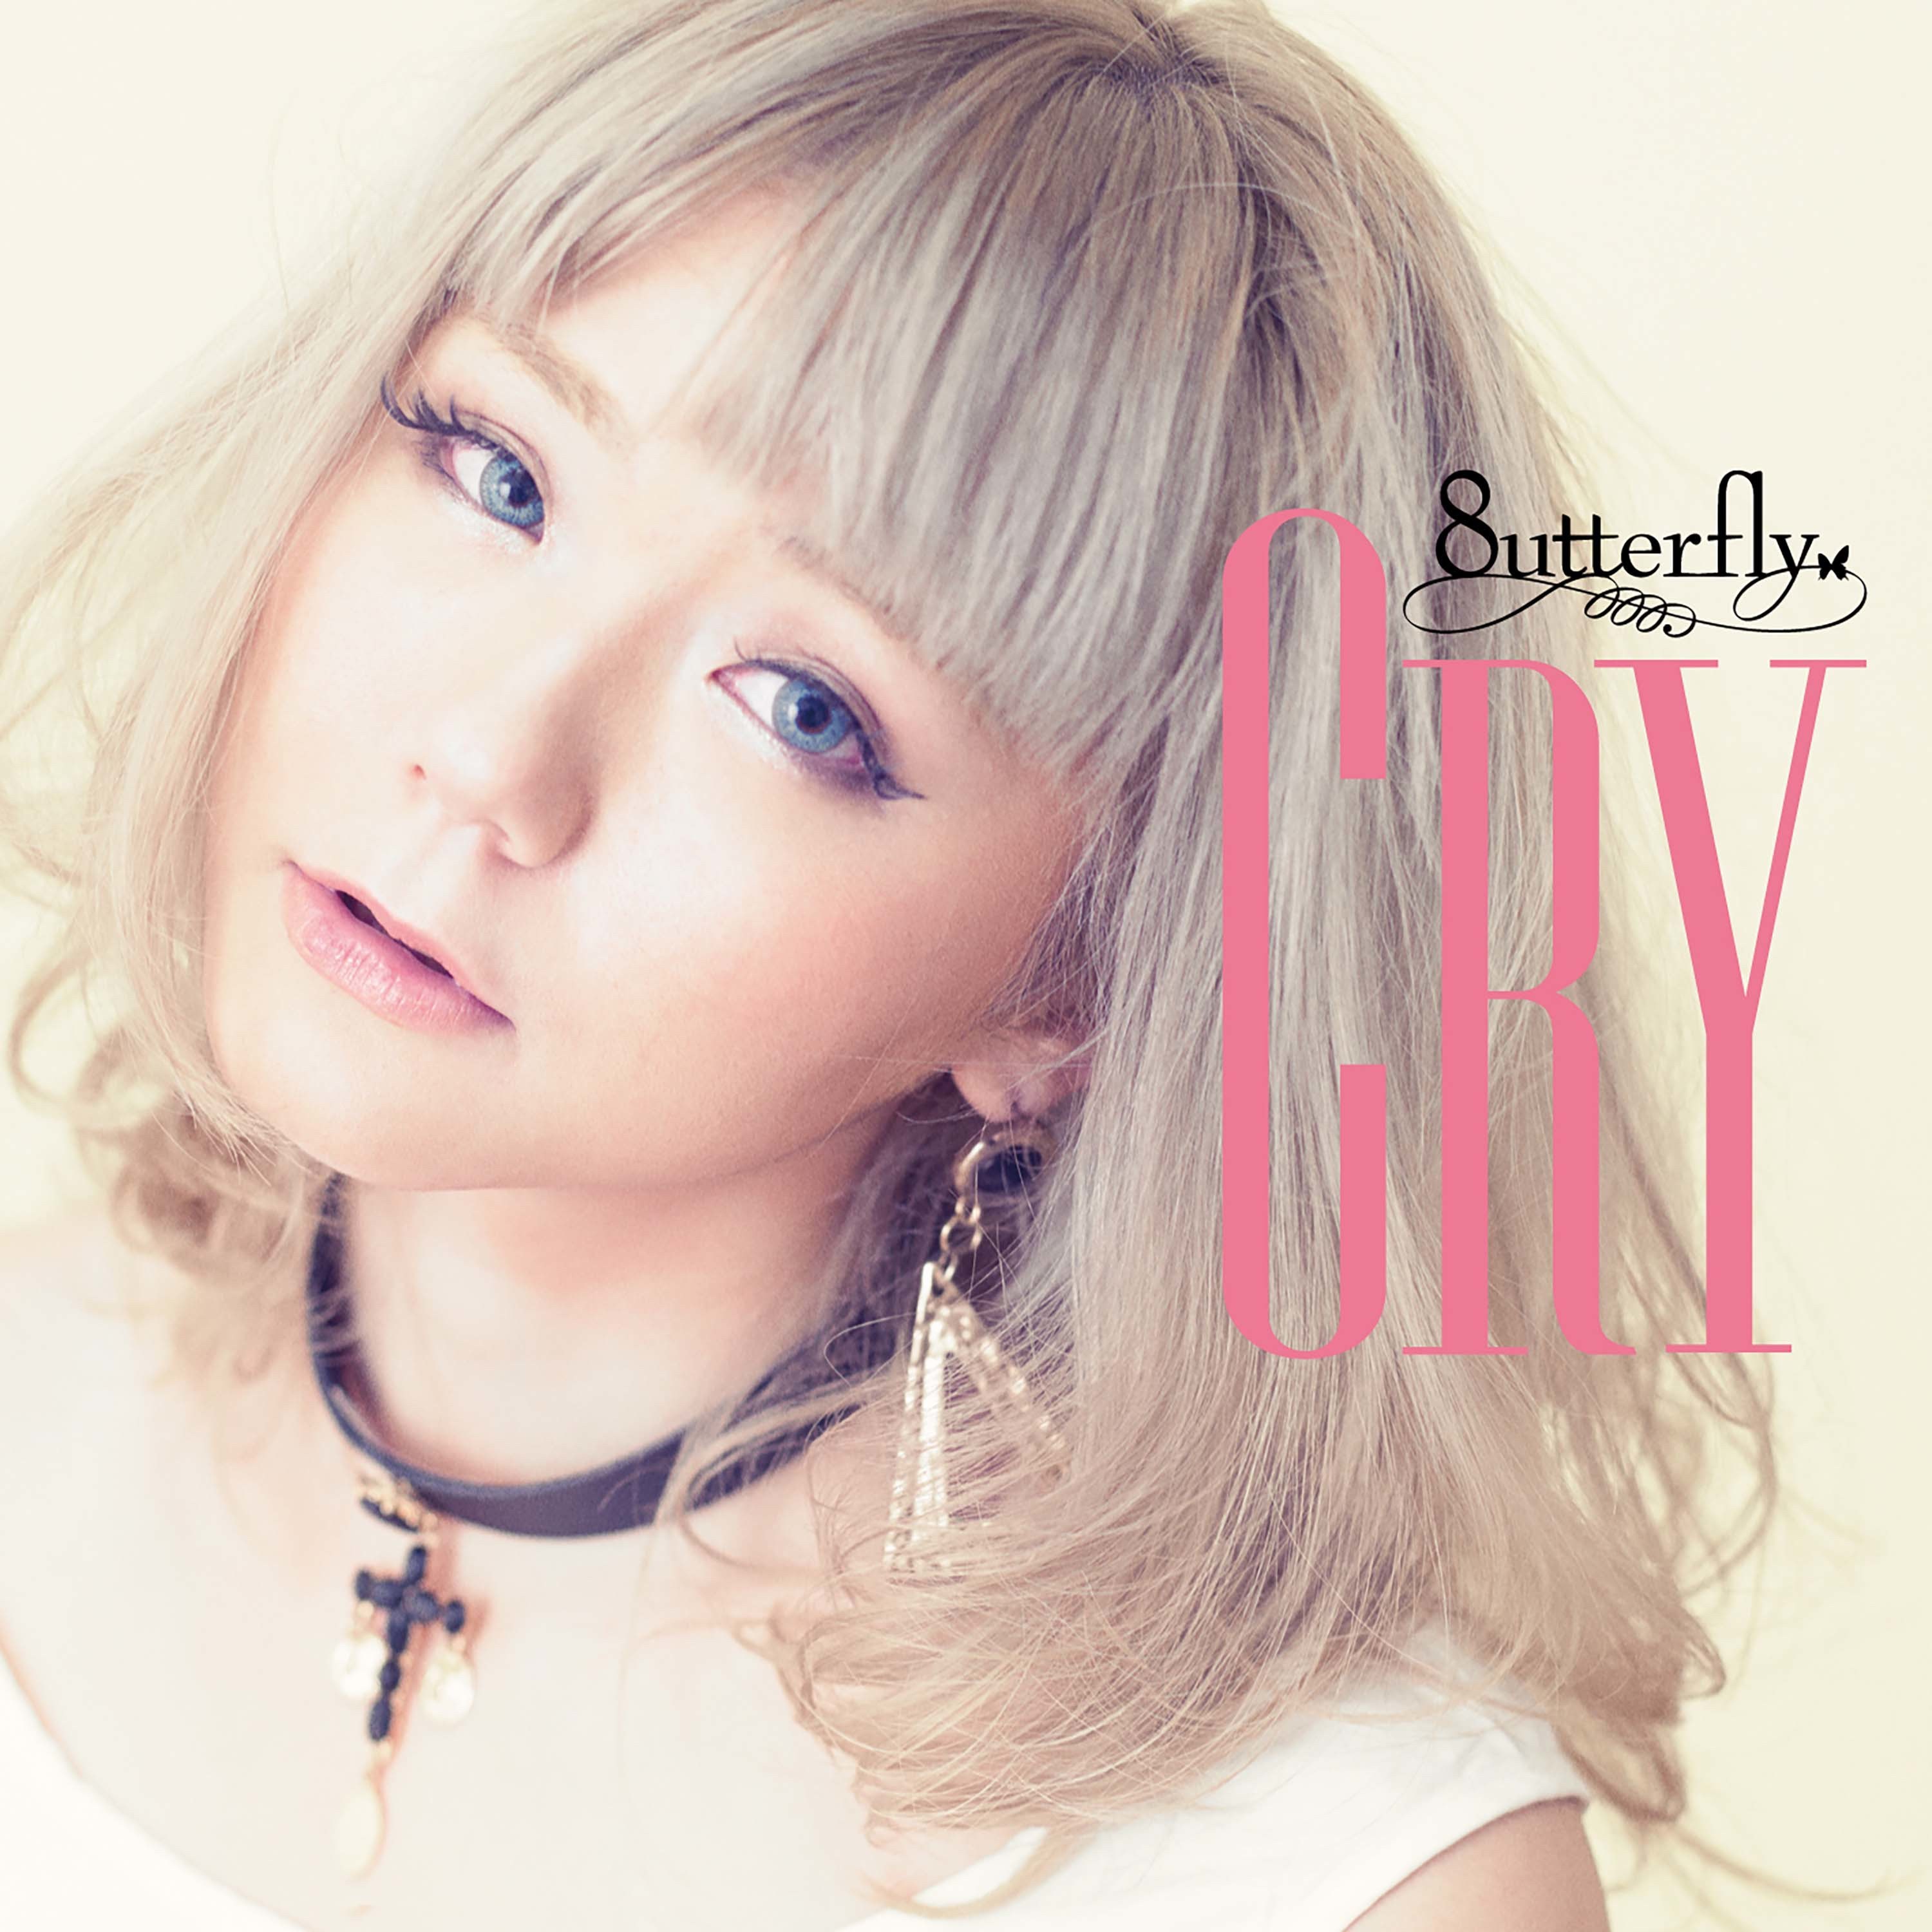 8utterfly - CRY (2015-01-28) [FLAC 24bit/44,1kHz] Download